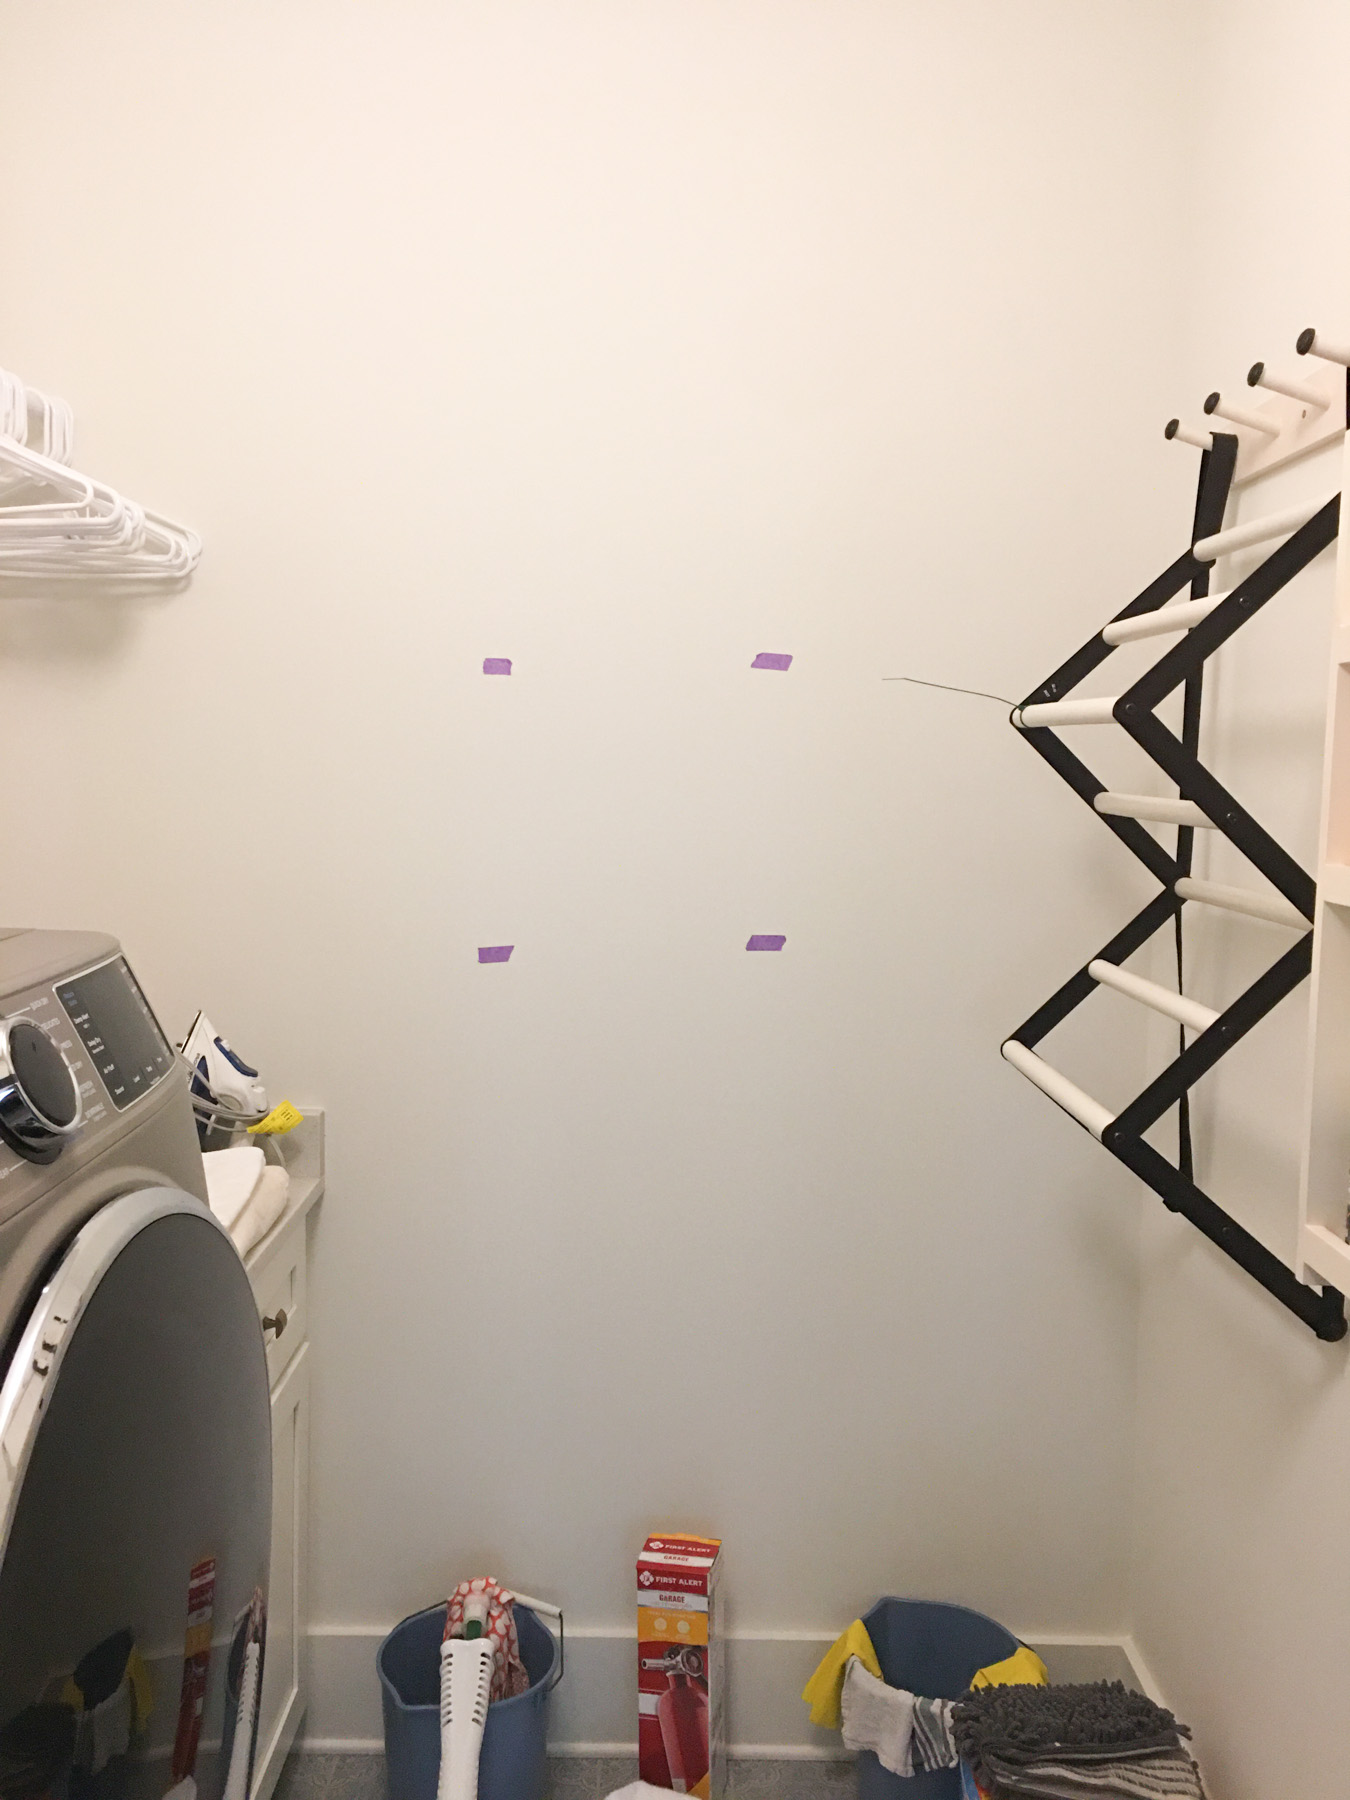 Before photo of a laundry room space with a taped out area on the wall for a new photograph